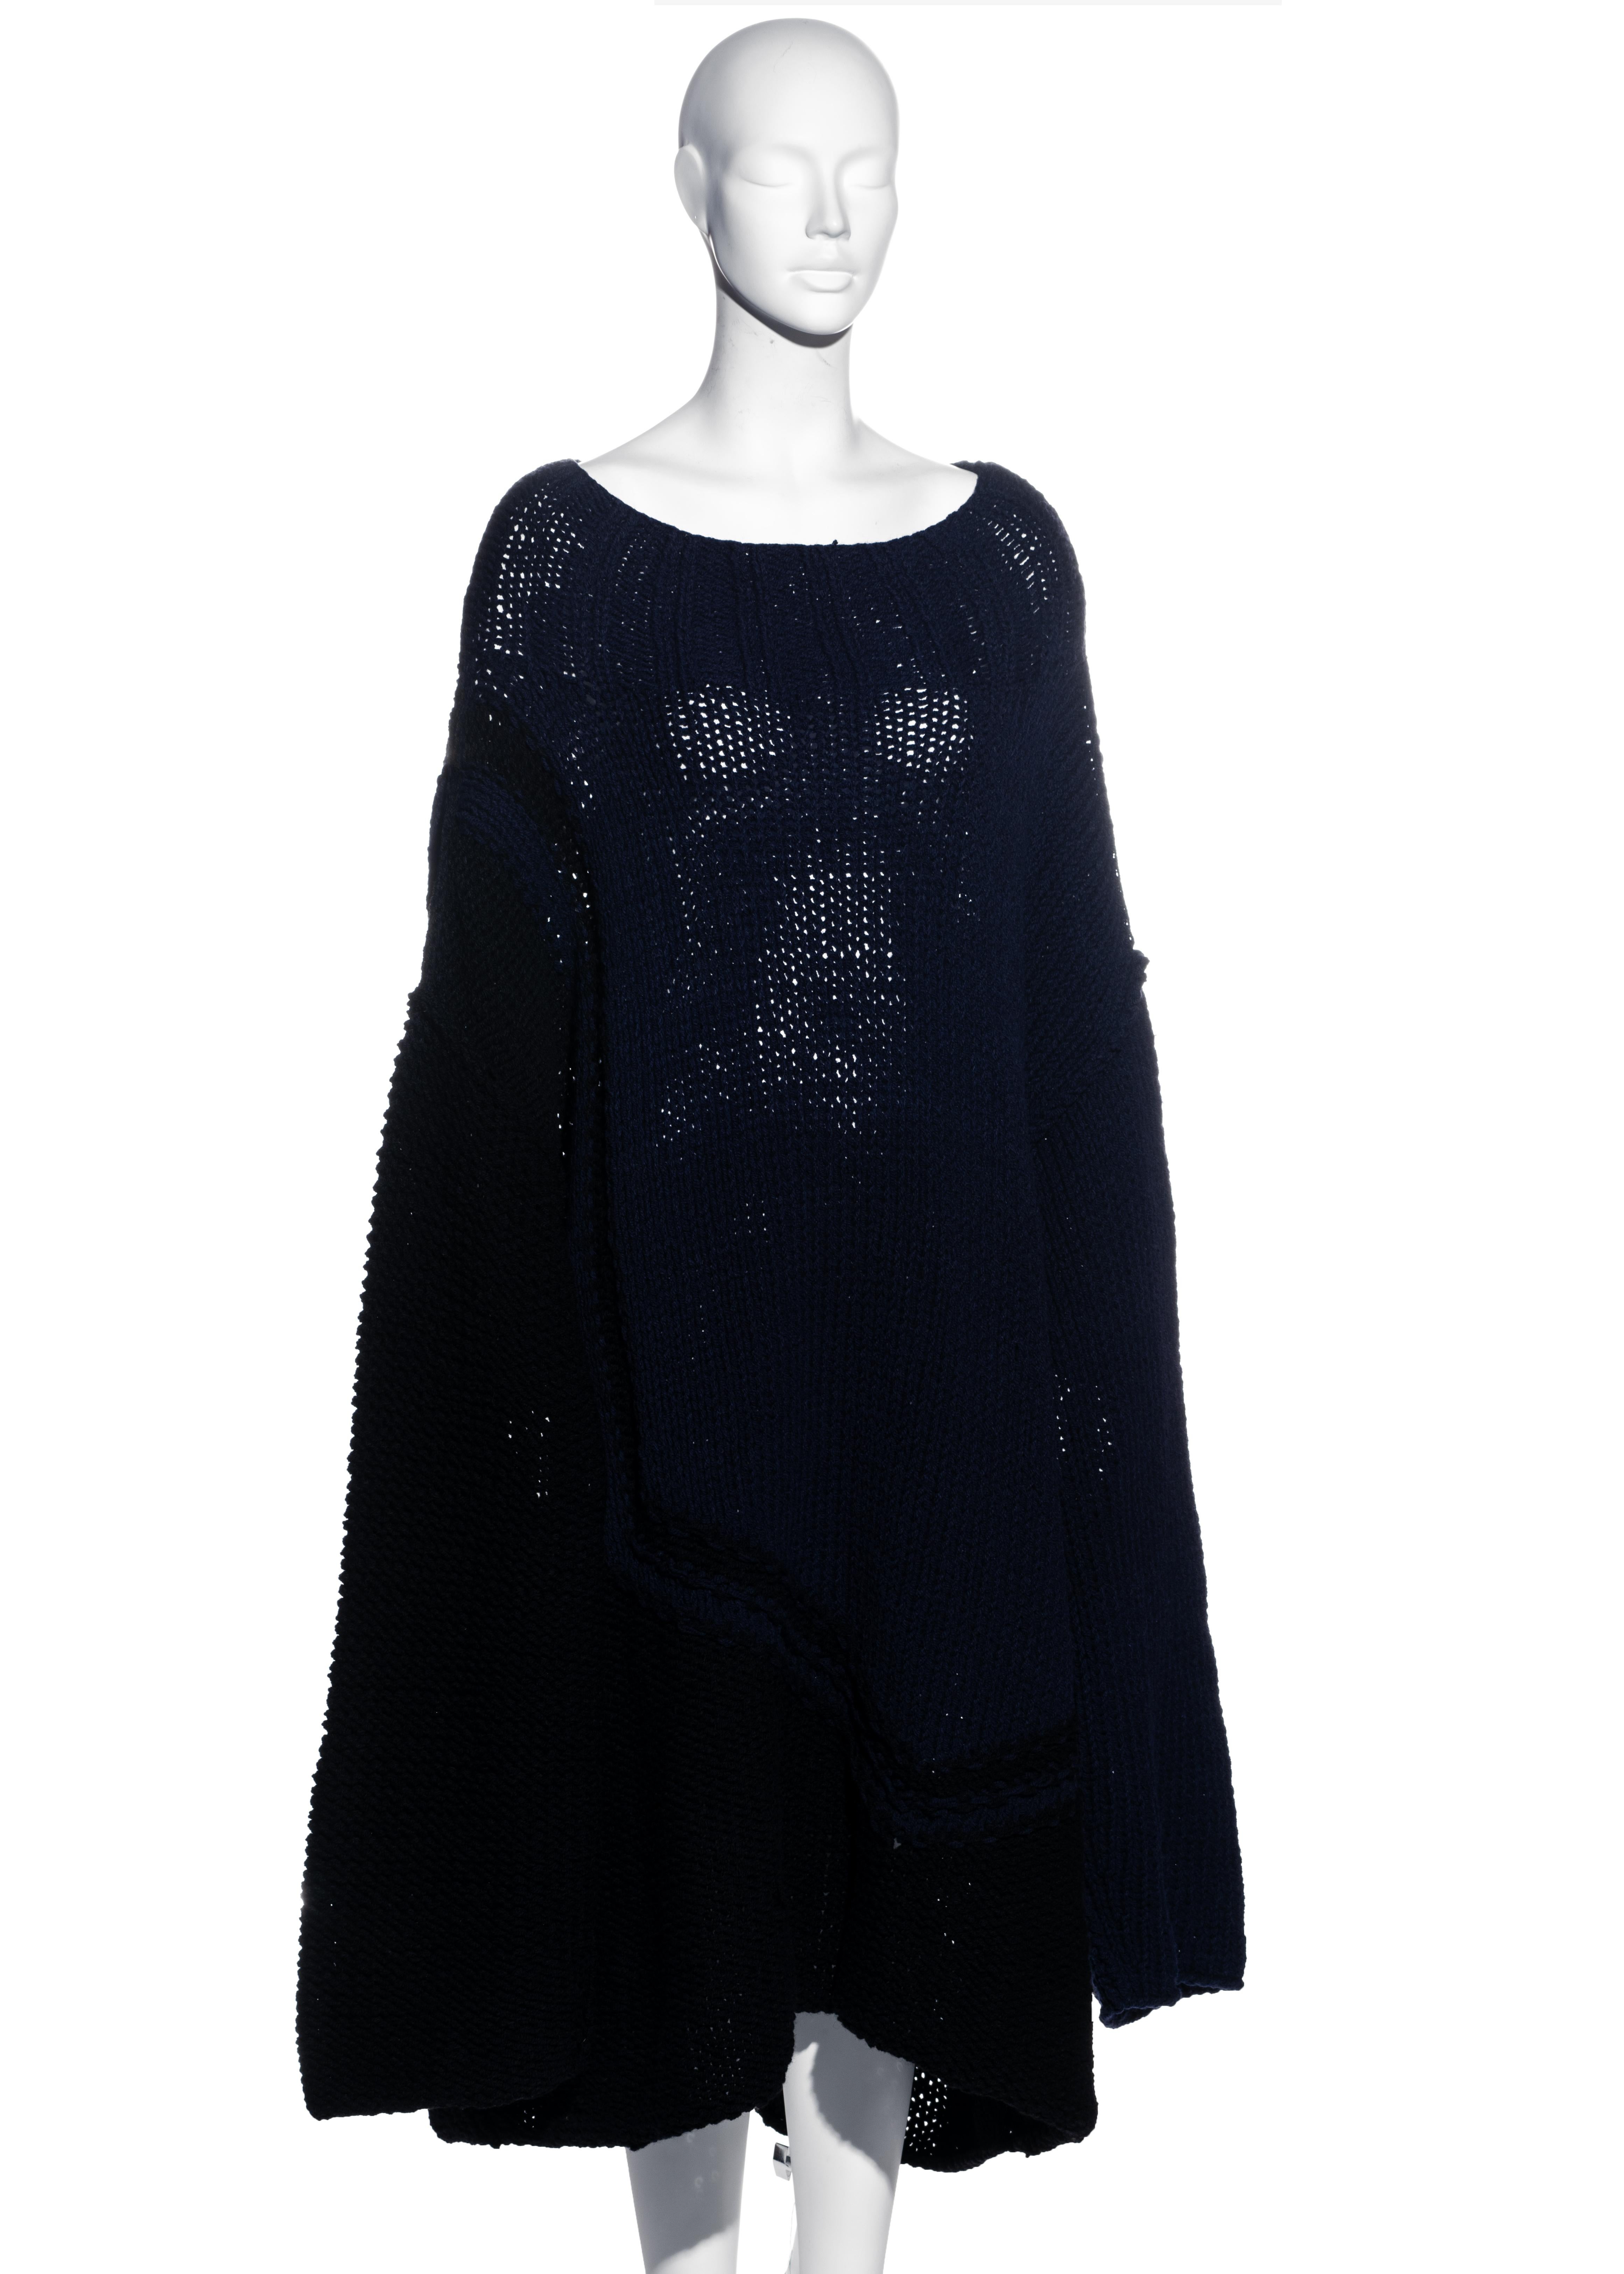 Yohji Yamamoto navy and black knitted wool oversized sweater, fw 1984 In Excellent Condition For Sale In London, GB